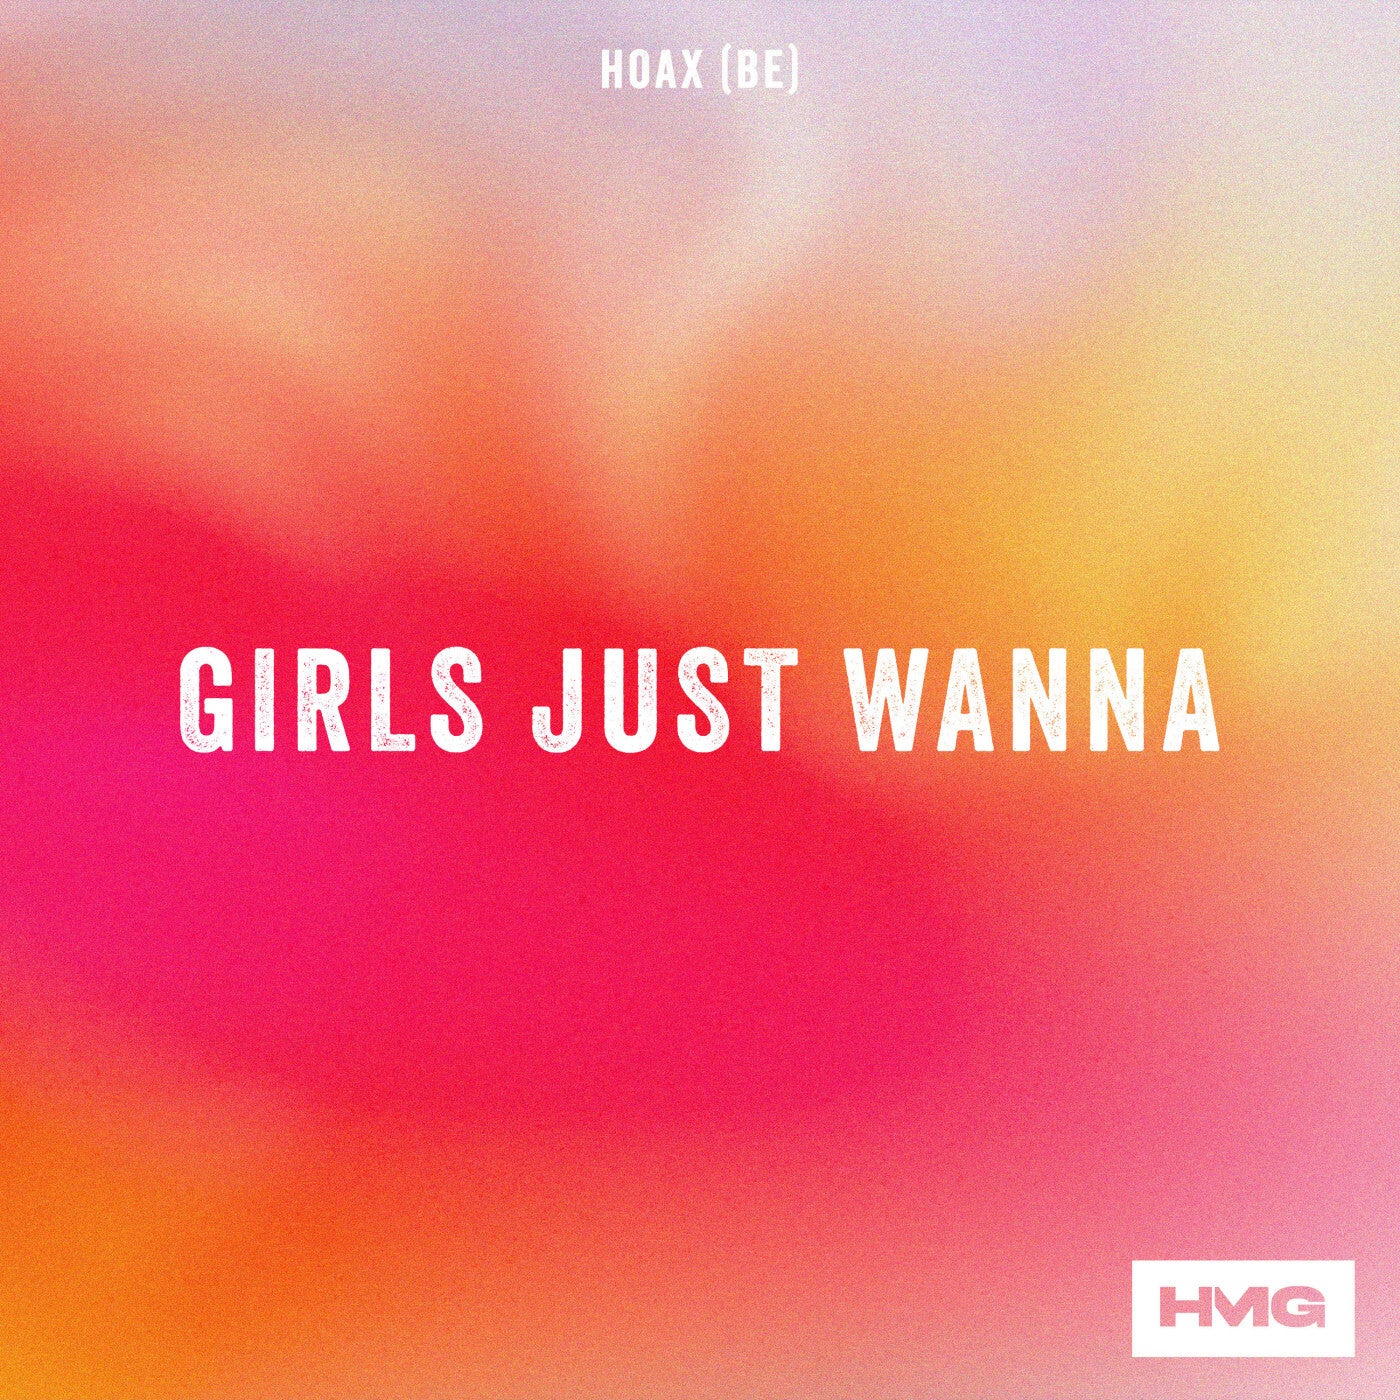 Hoax (BE) - Girls Just Wanna on HMG